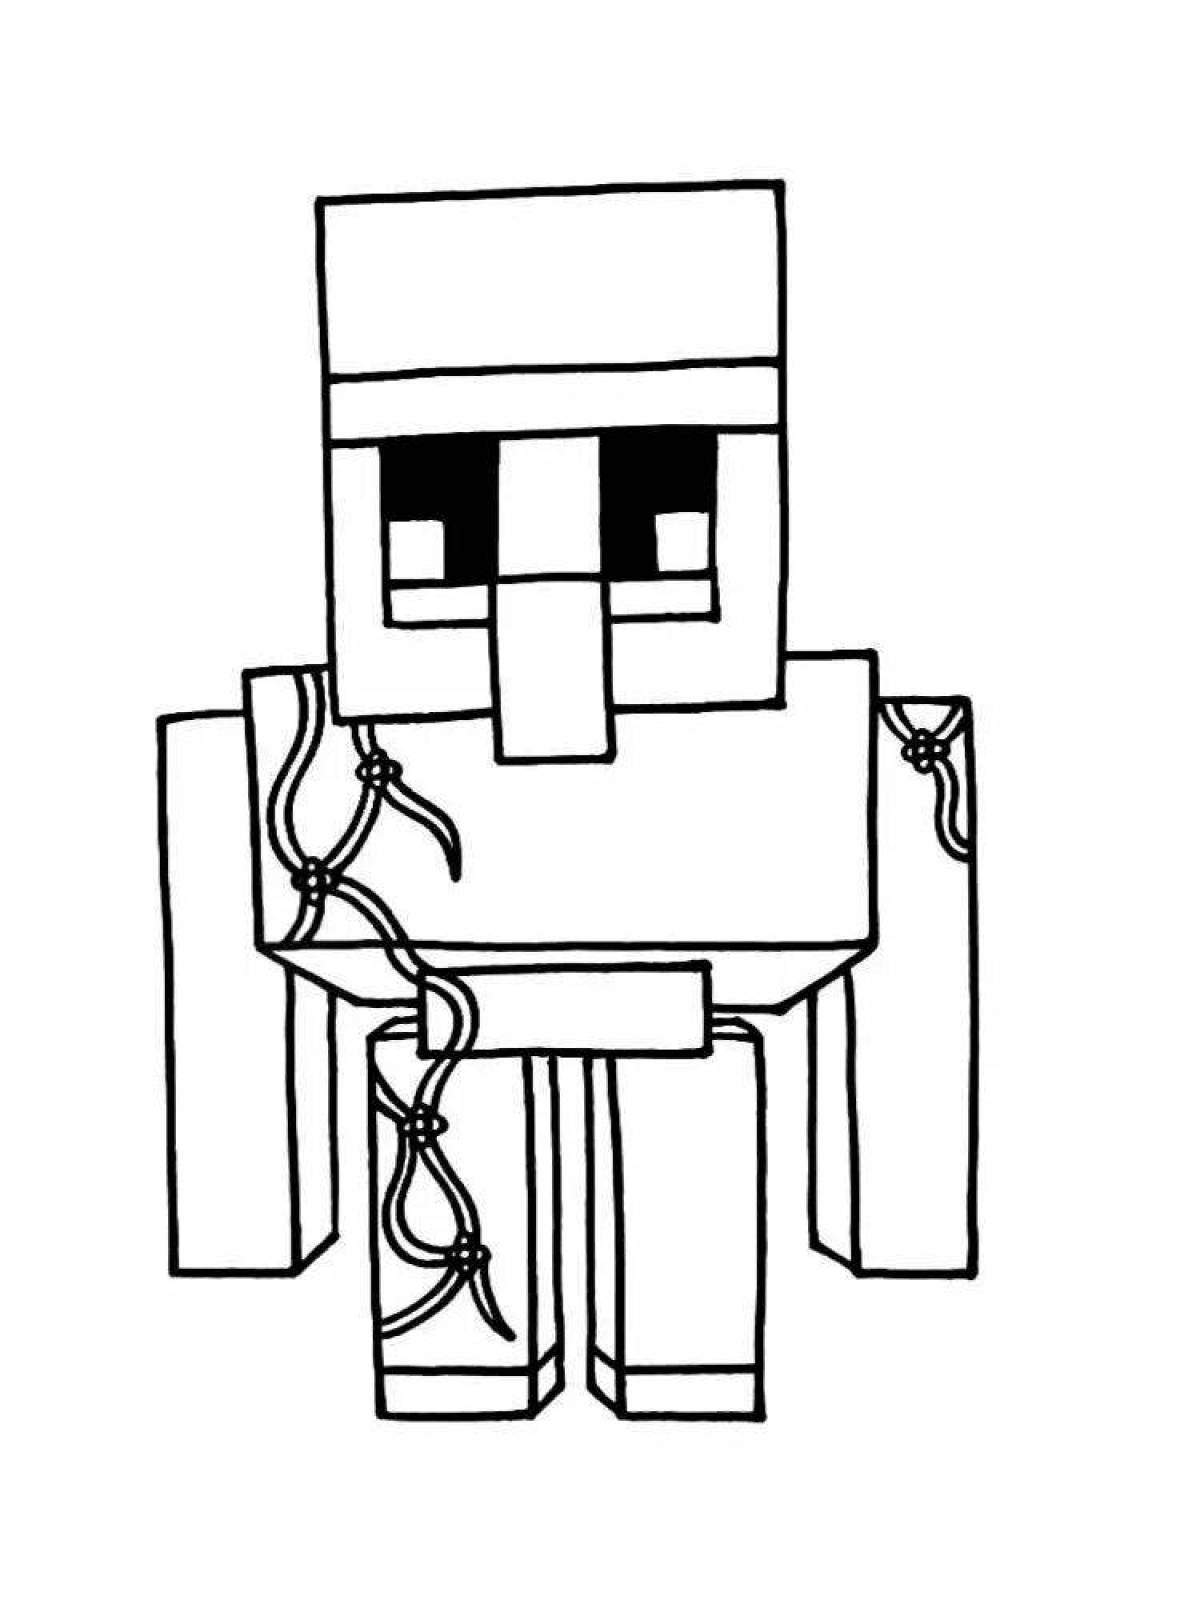 Minecraft golem coloring page